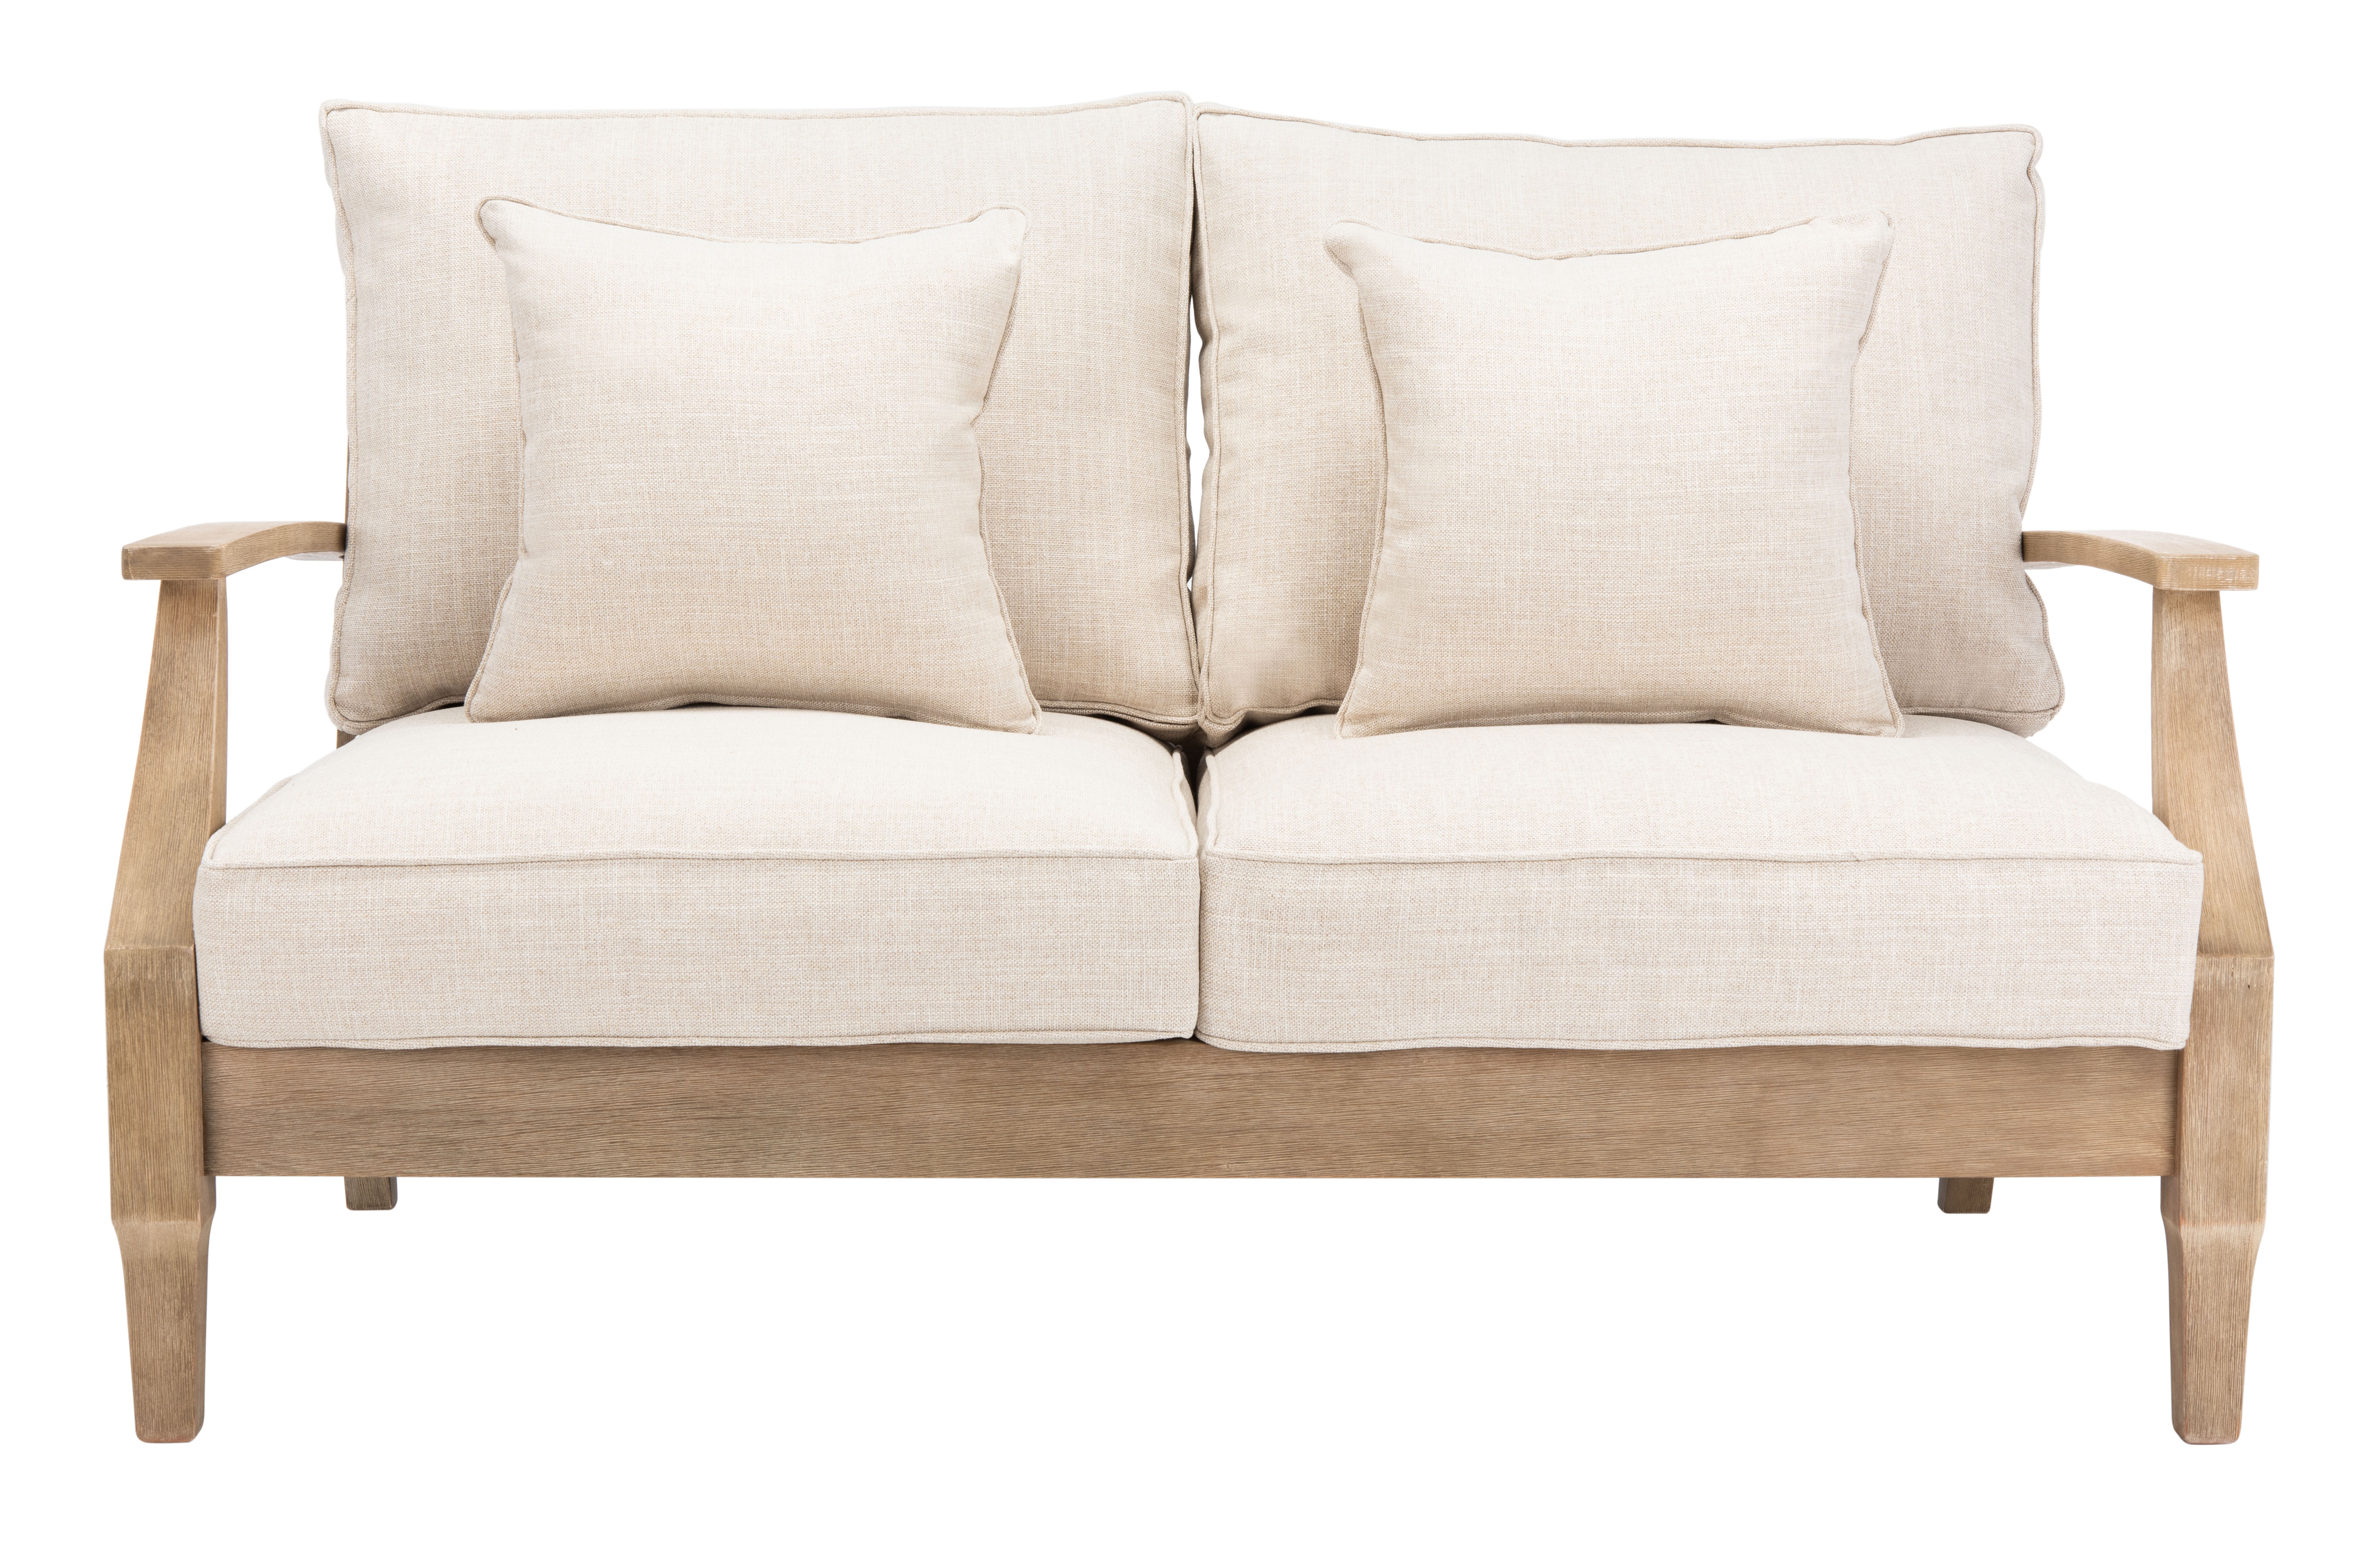 Martinique Wood Patio Loveseat, Natural & White - Arlo Home